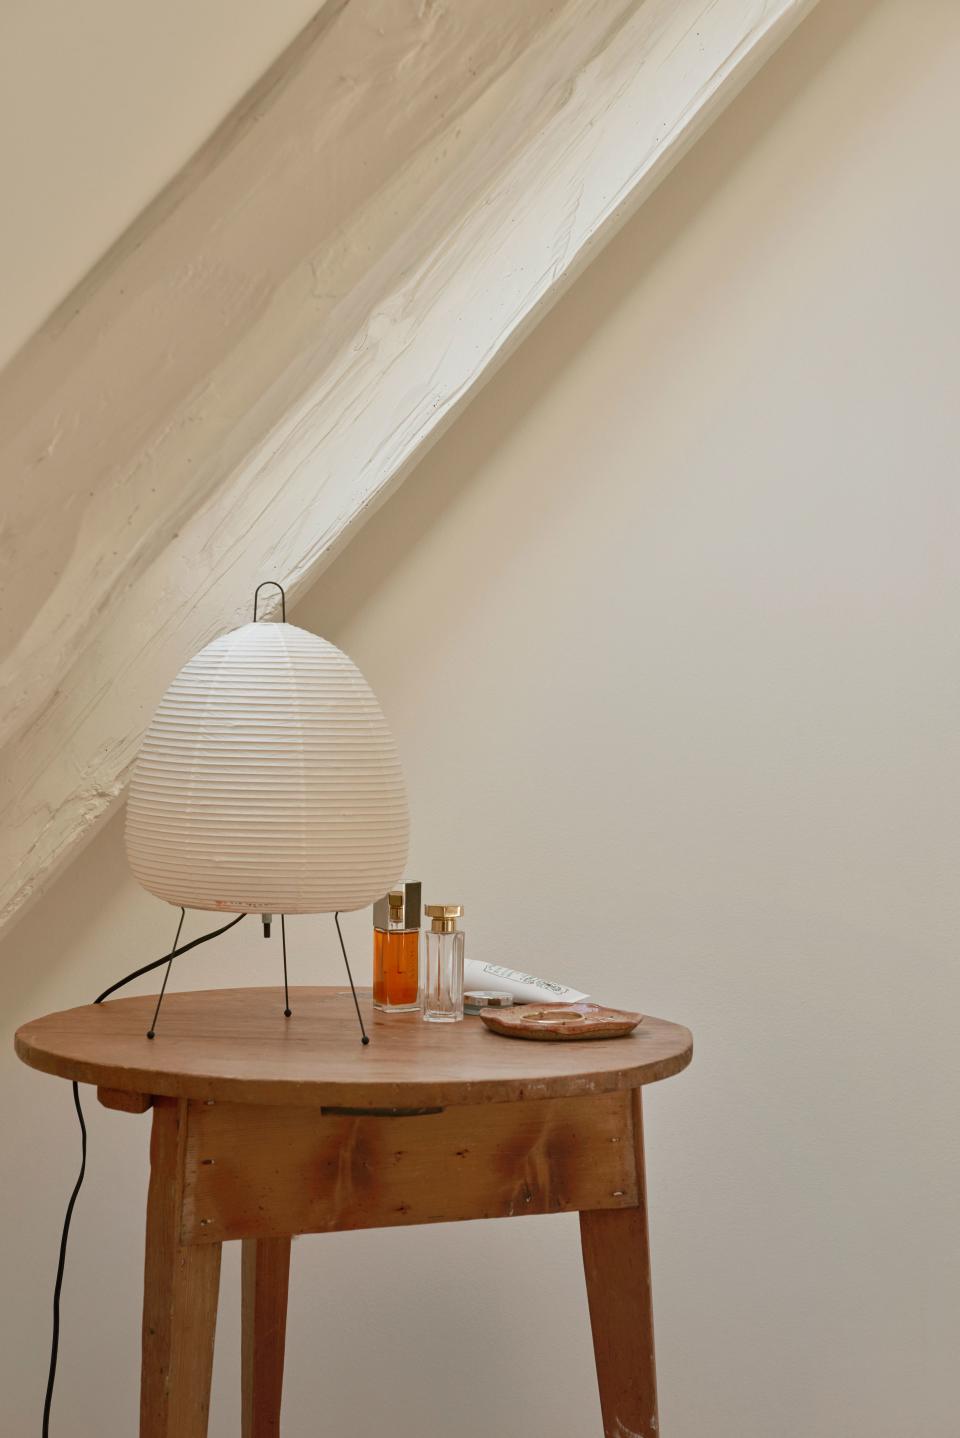 An Akari light fixture provides light atop an antique wood round table in the bedroom, all in front of one of the slanted wood beams that she painted white (they run all along one wall of every room in the apartment, adding character but also making the layout more complex).